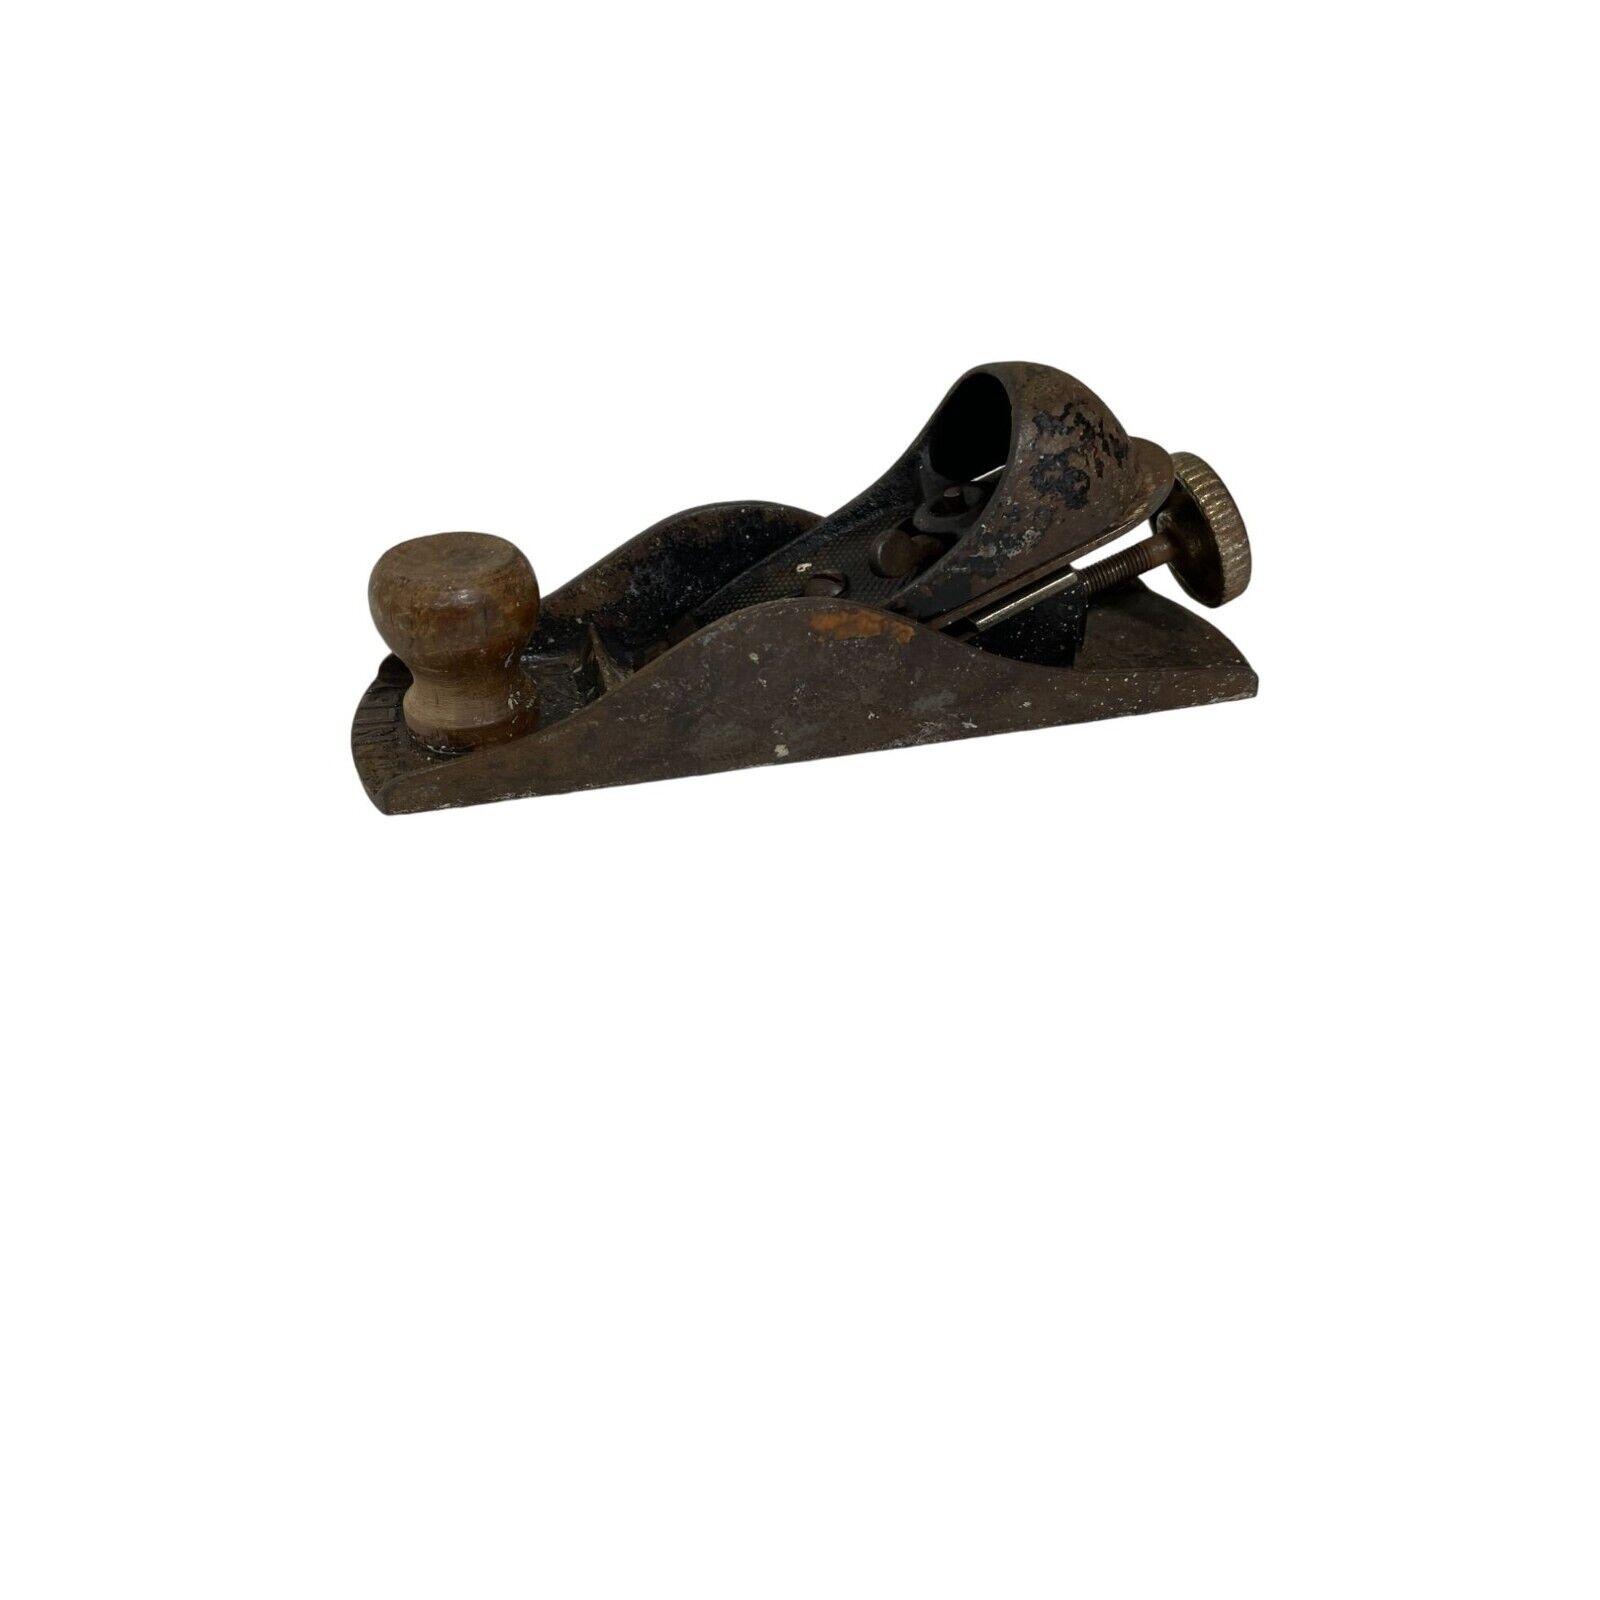 Stanley No. 220 Block Plane Late 1800\'s - early 1900\'s Type 1